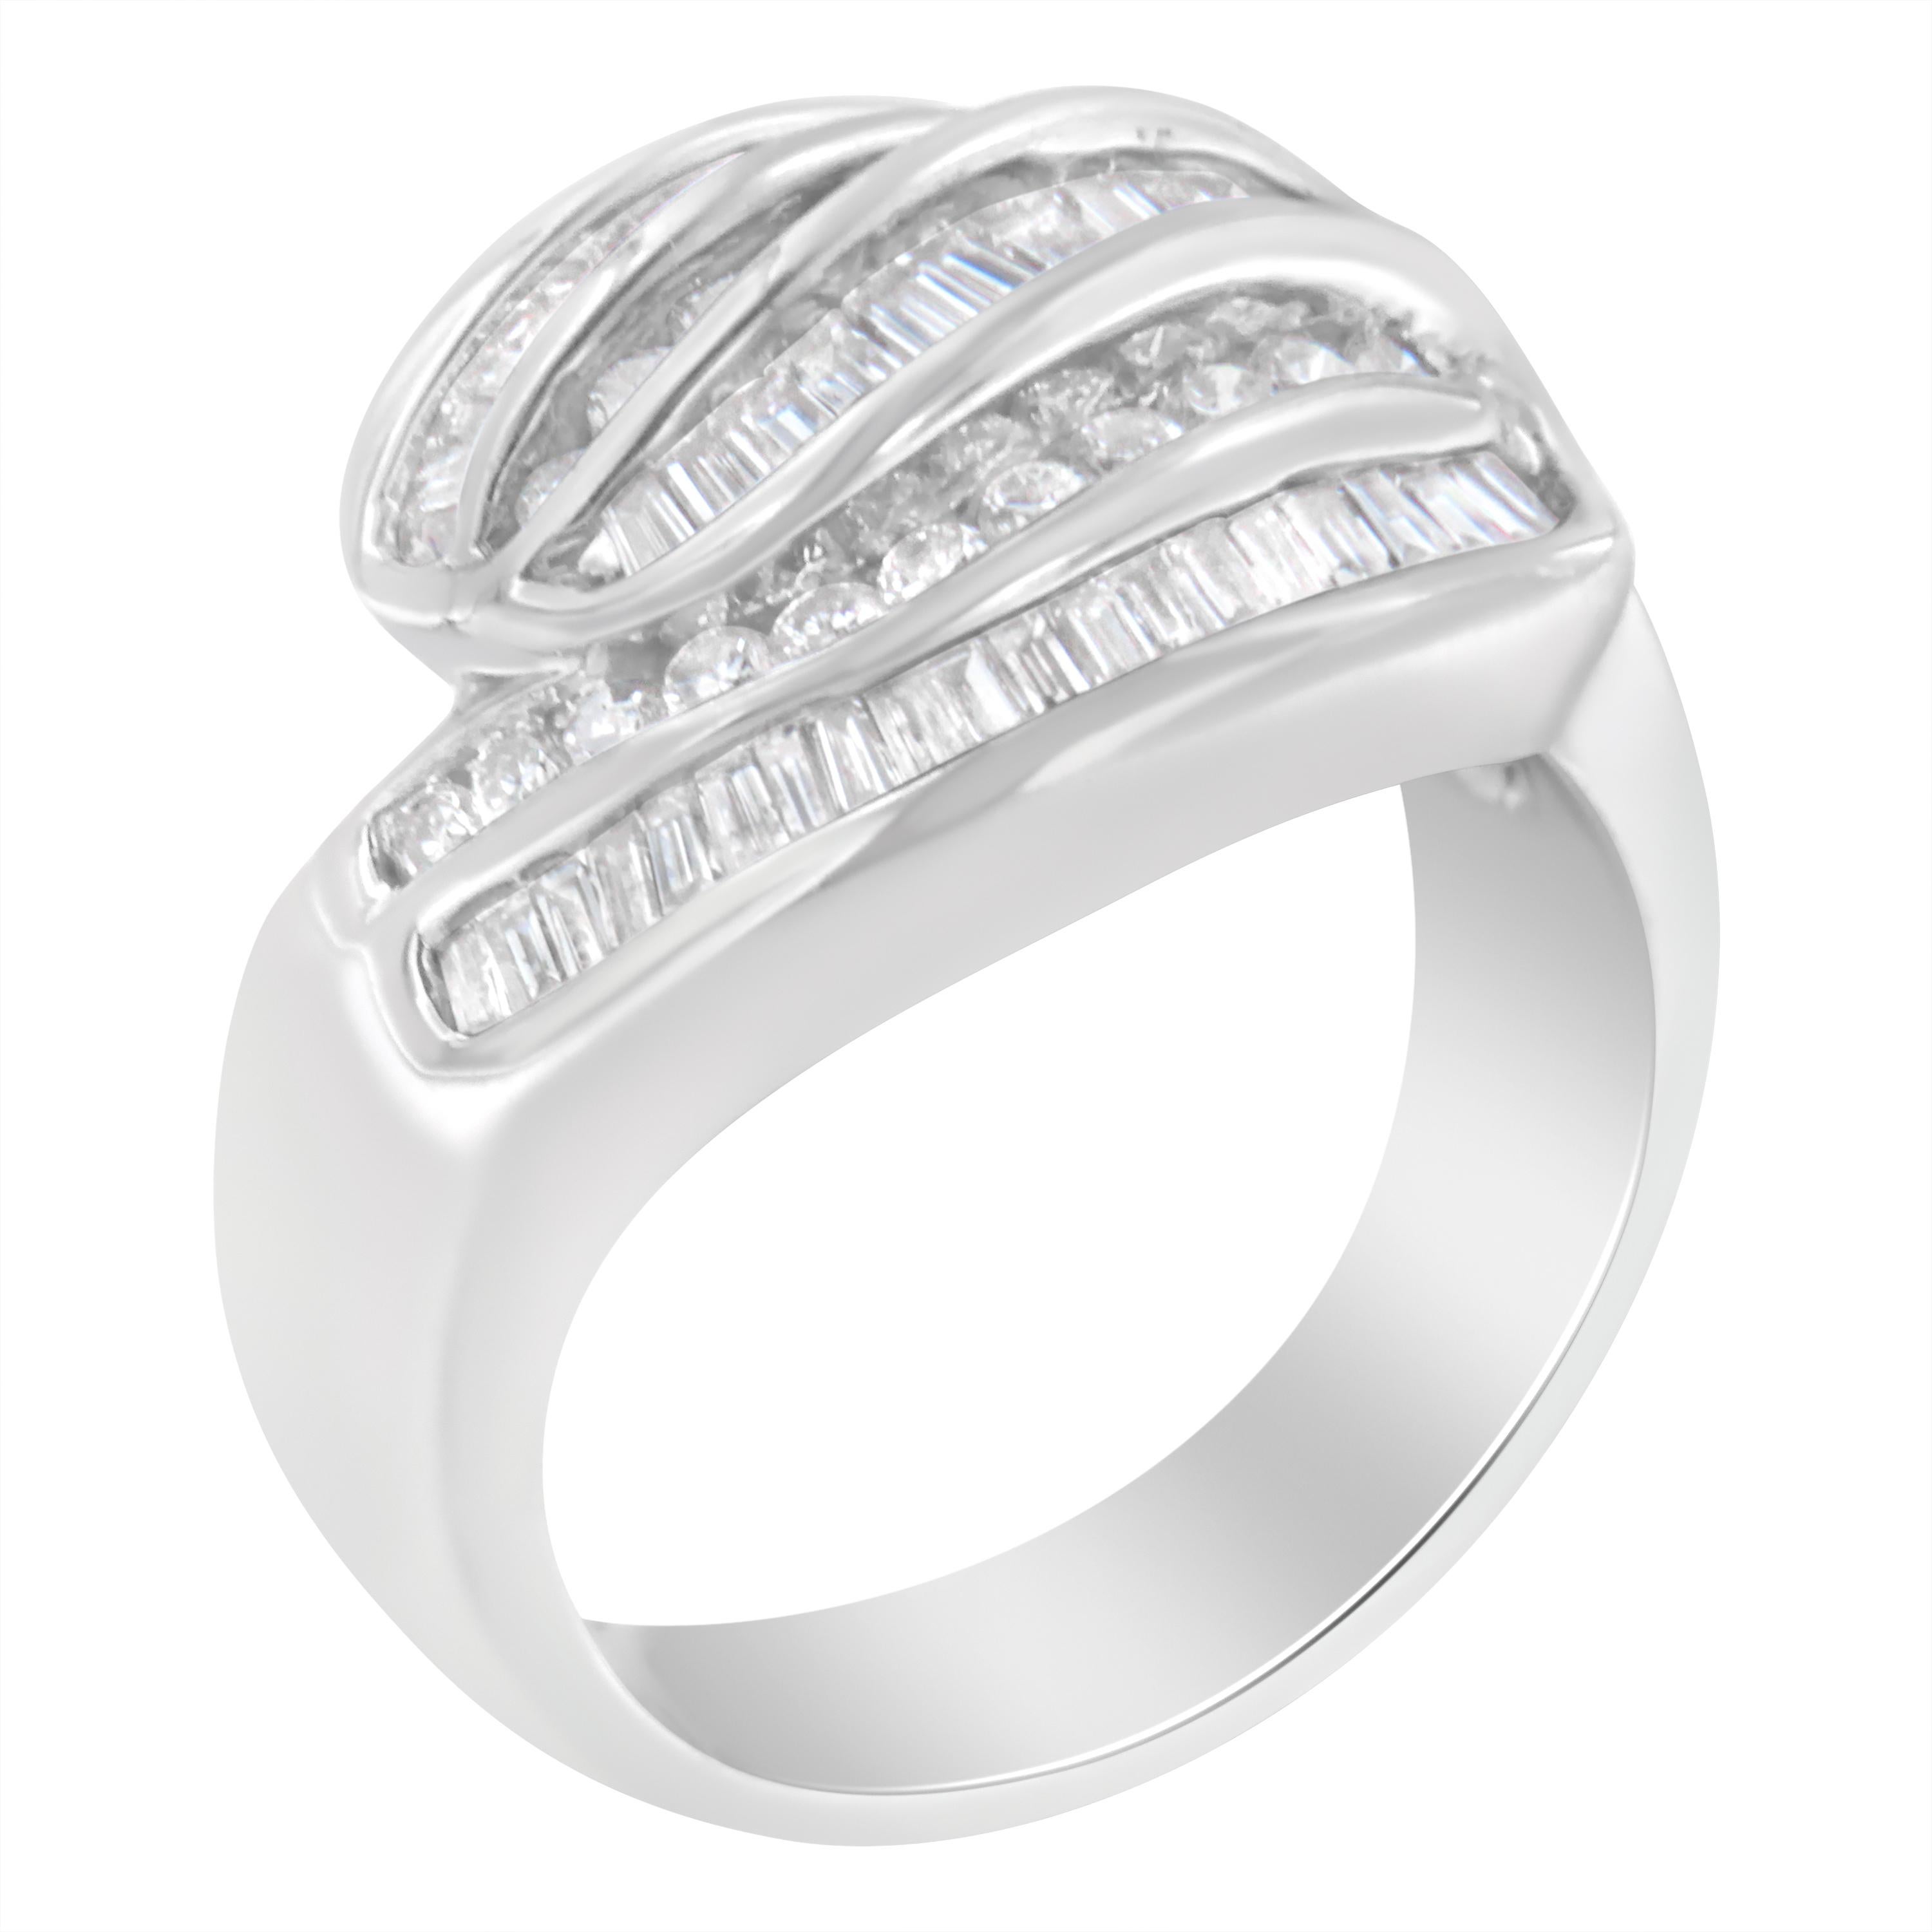 An elegant diamond band that sparkles with five rows of alternating round brilliant cut and baguette diamonds. The wide band is crafted in cool 14 karat white gold. It has a total diamond weight of 1 carat. This is a rare one-of-a-kind piece, and